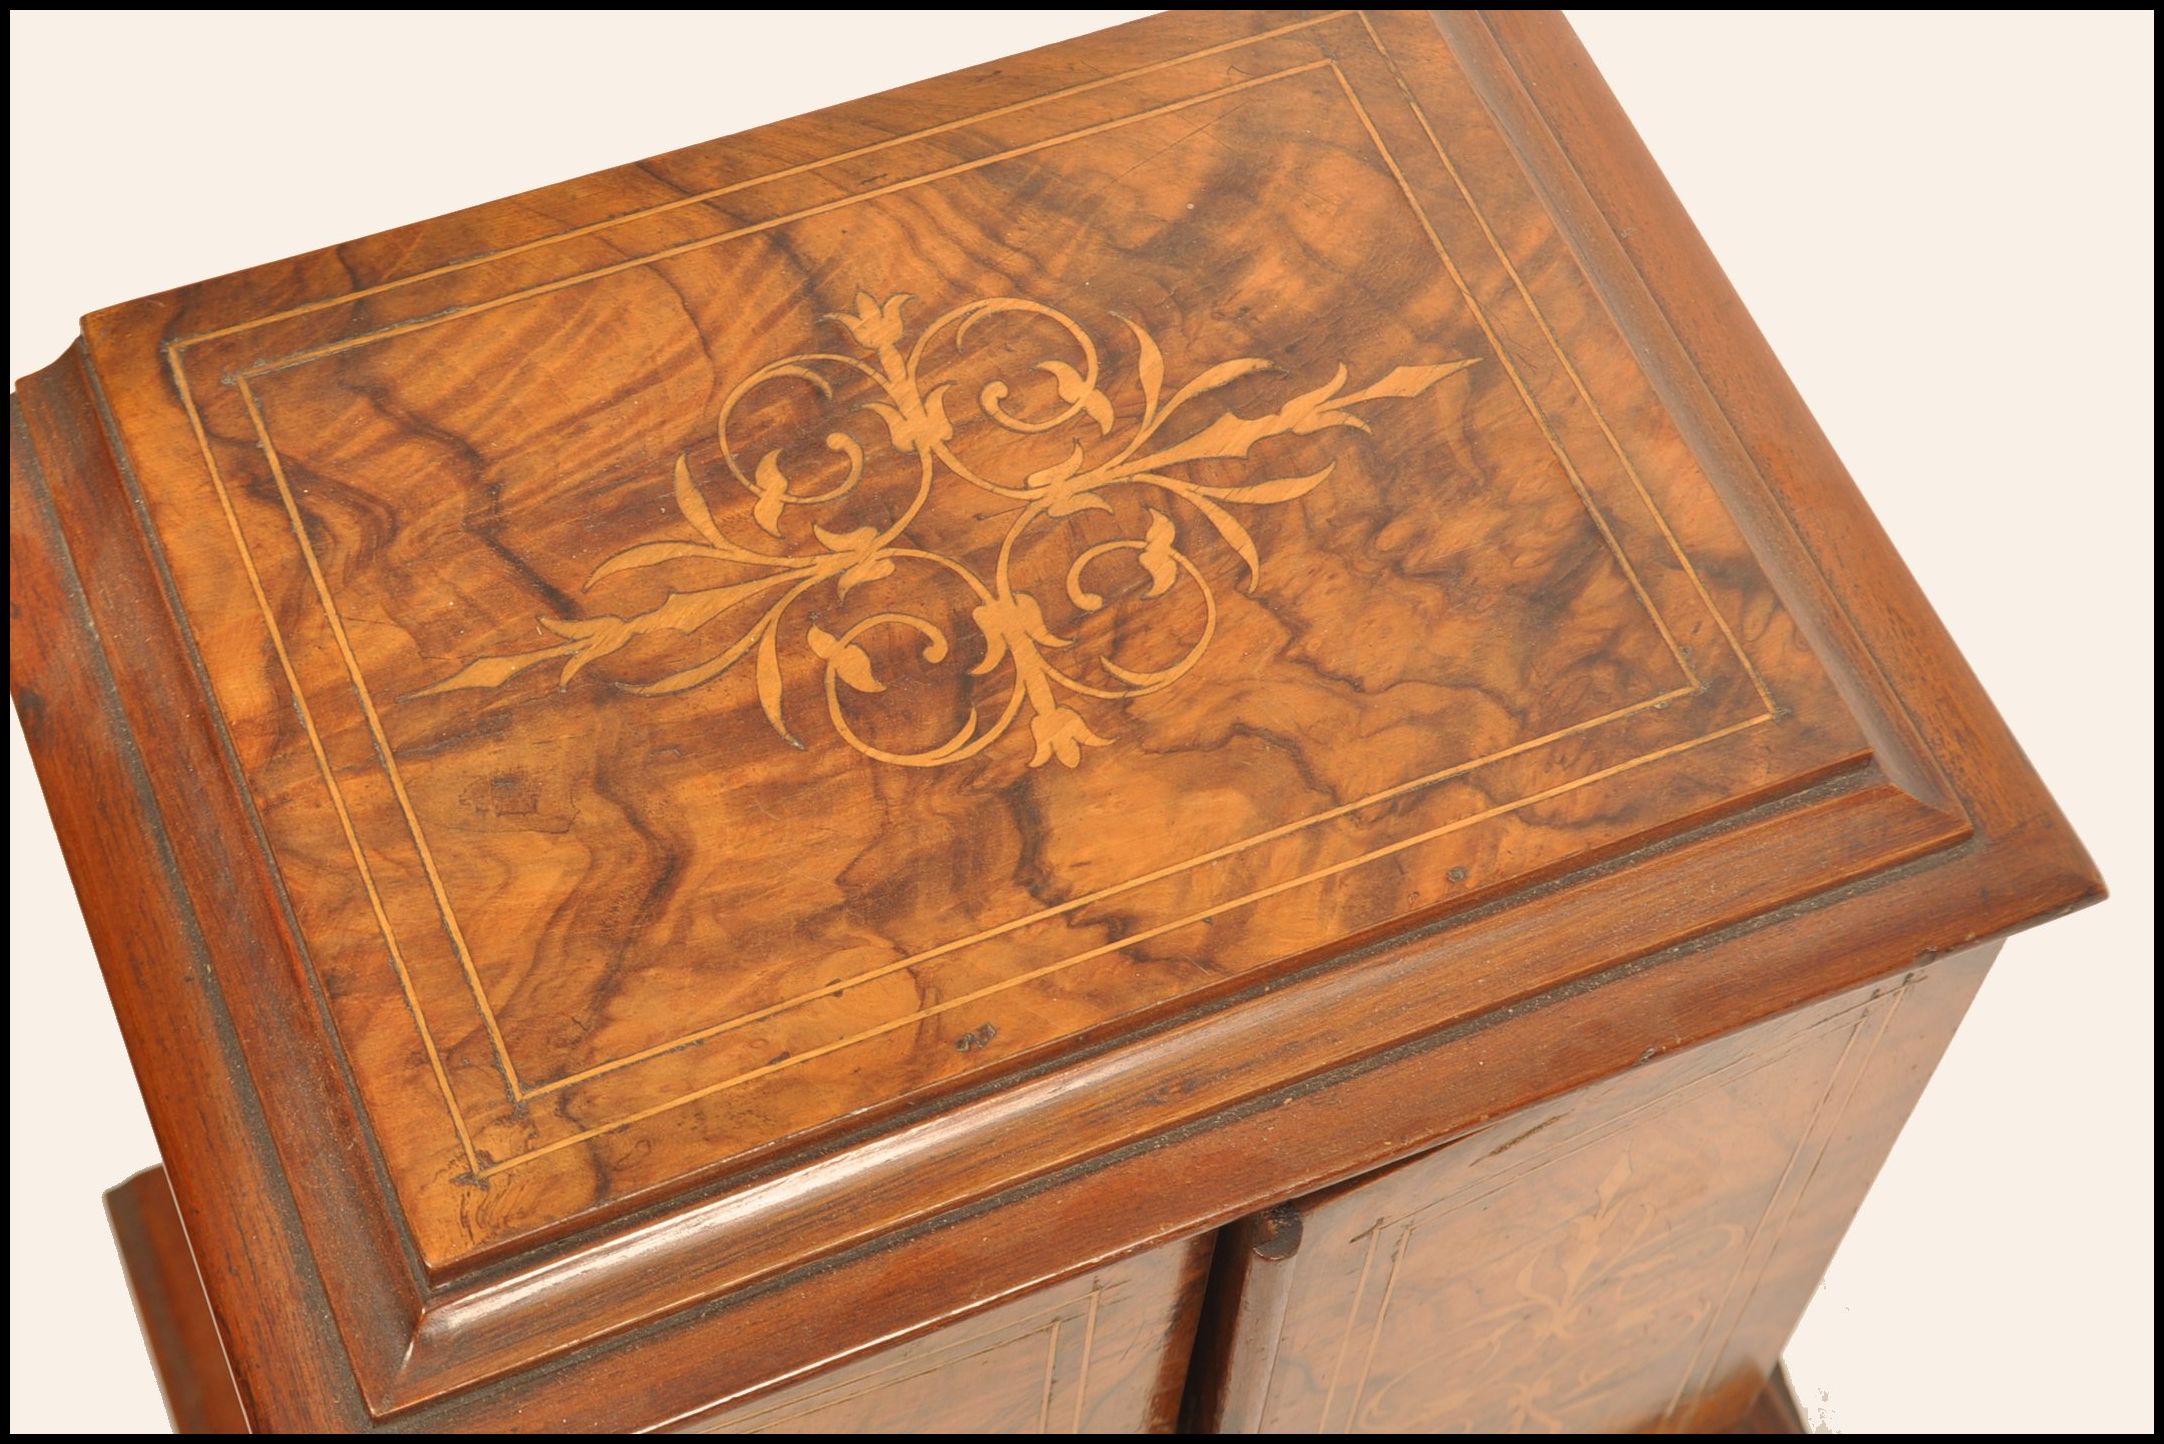 A 19th century table mounted jewellery casket of walnut construction with inlaid scrolled designs to - Image 3 of 8